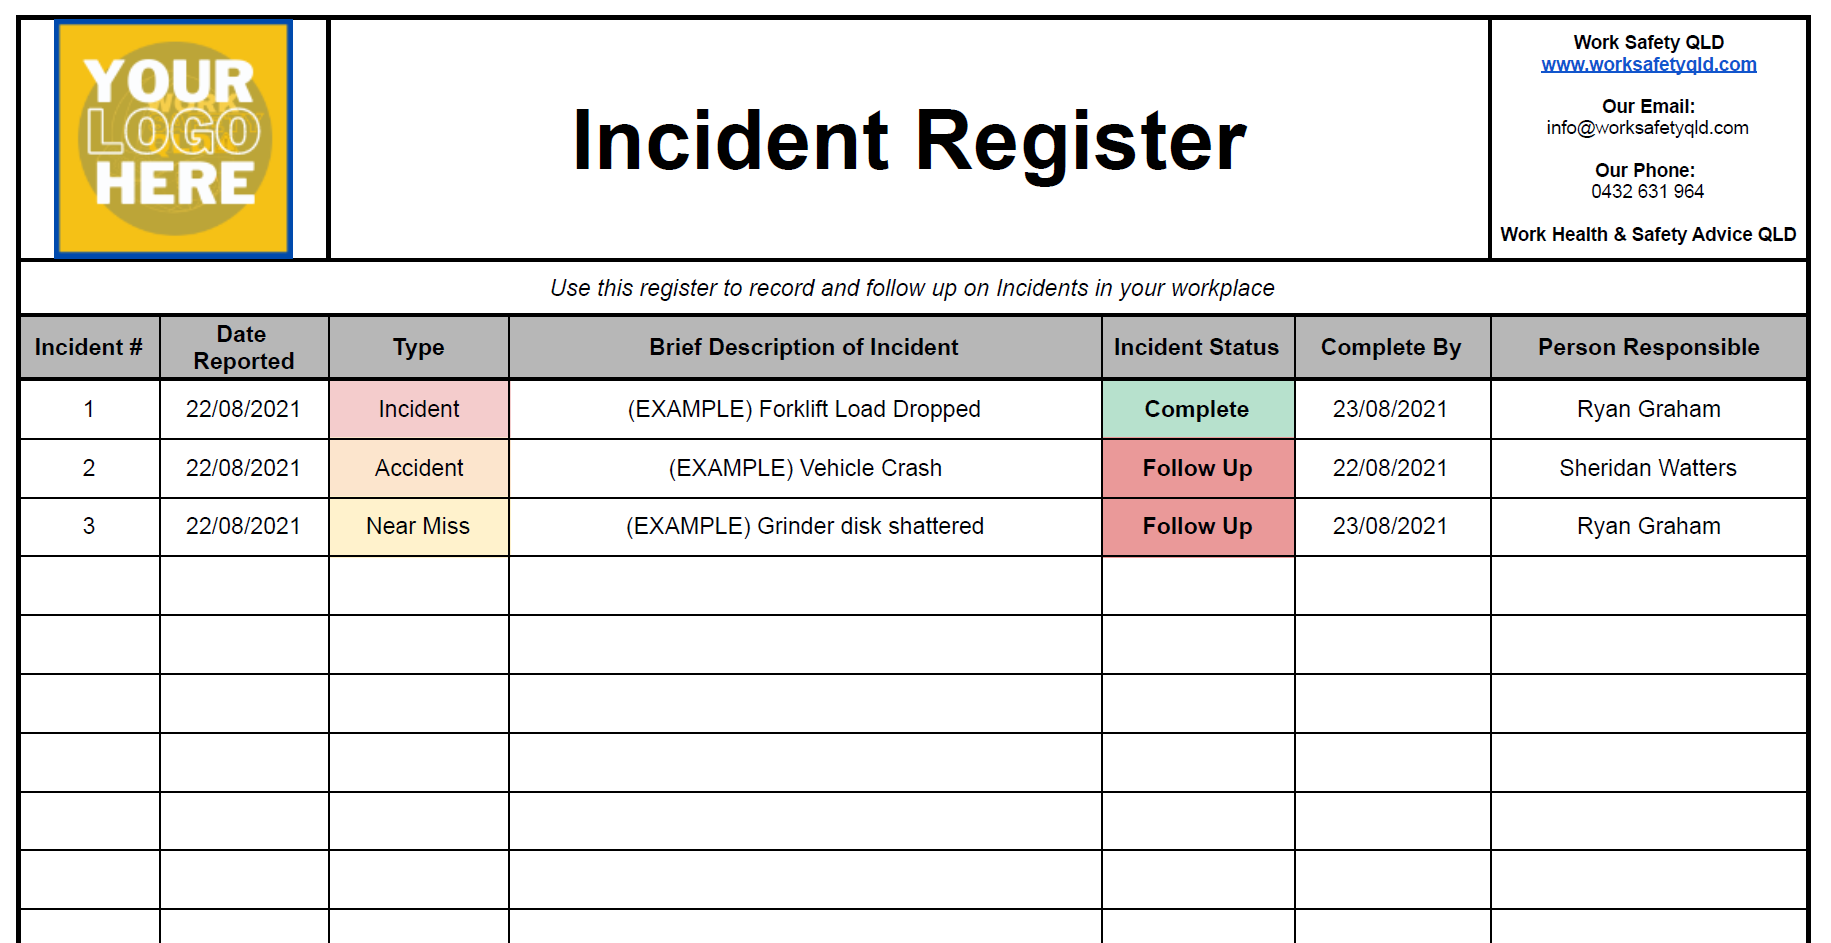 Free Incident Register Template For Queensland – Work Safety QLD Throughout Incident Report Register Template